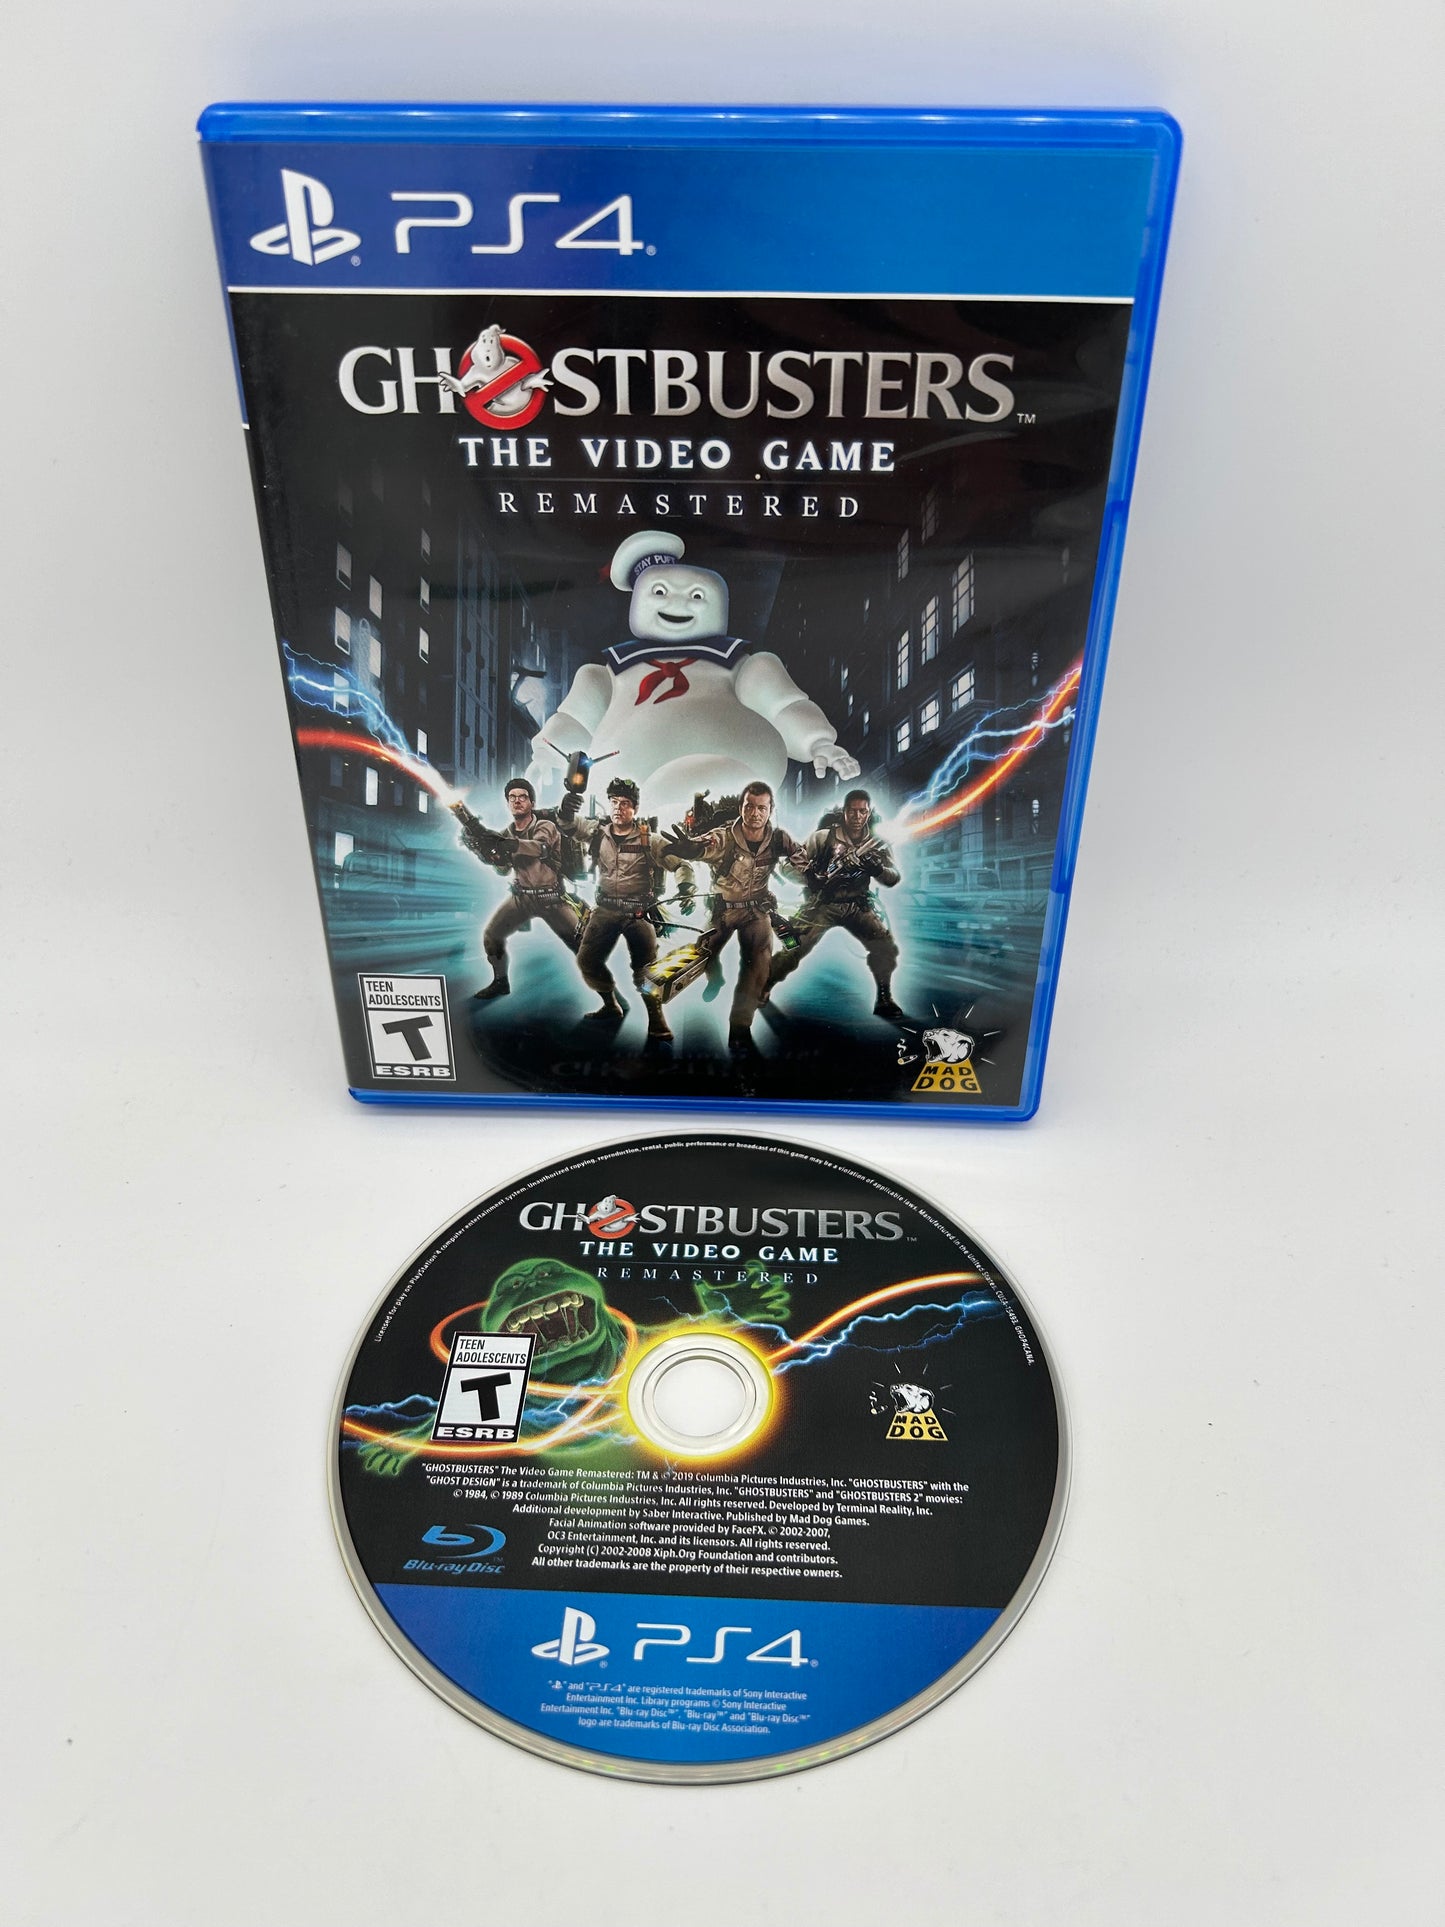 PiXEL-RETRO.COM : SONY PLAYSTATION 4 (PS4) COMPLETE CIB BOX MANUAL GAME NTSC GHOSTBUSTERS THE VIDEO GAME REMASTERED